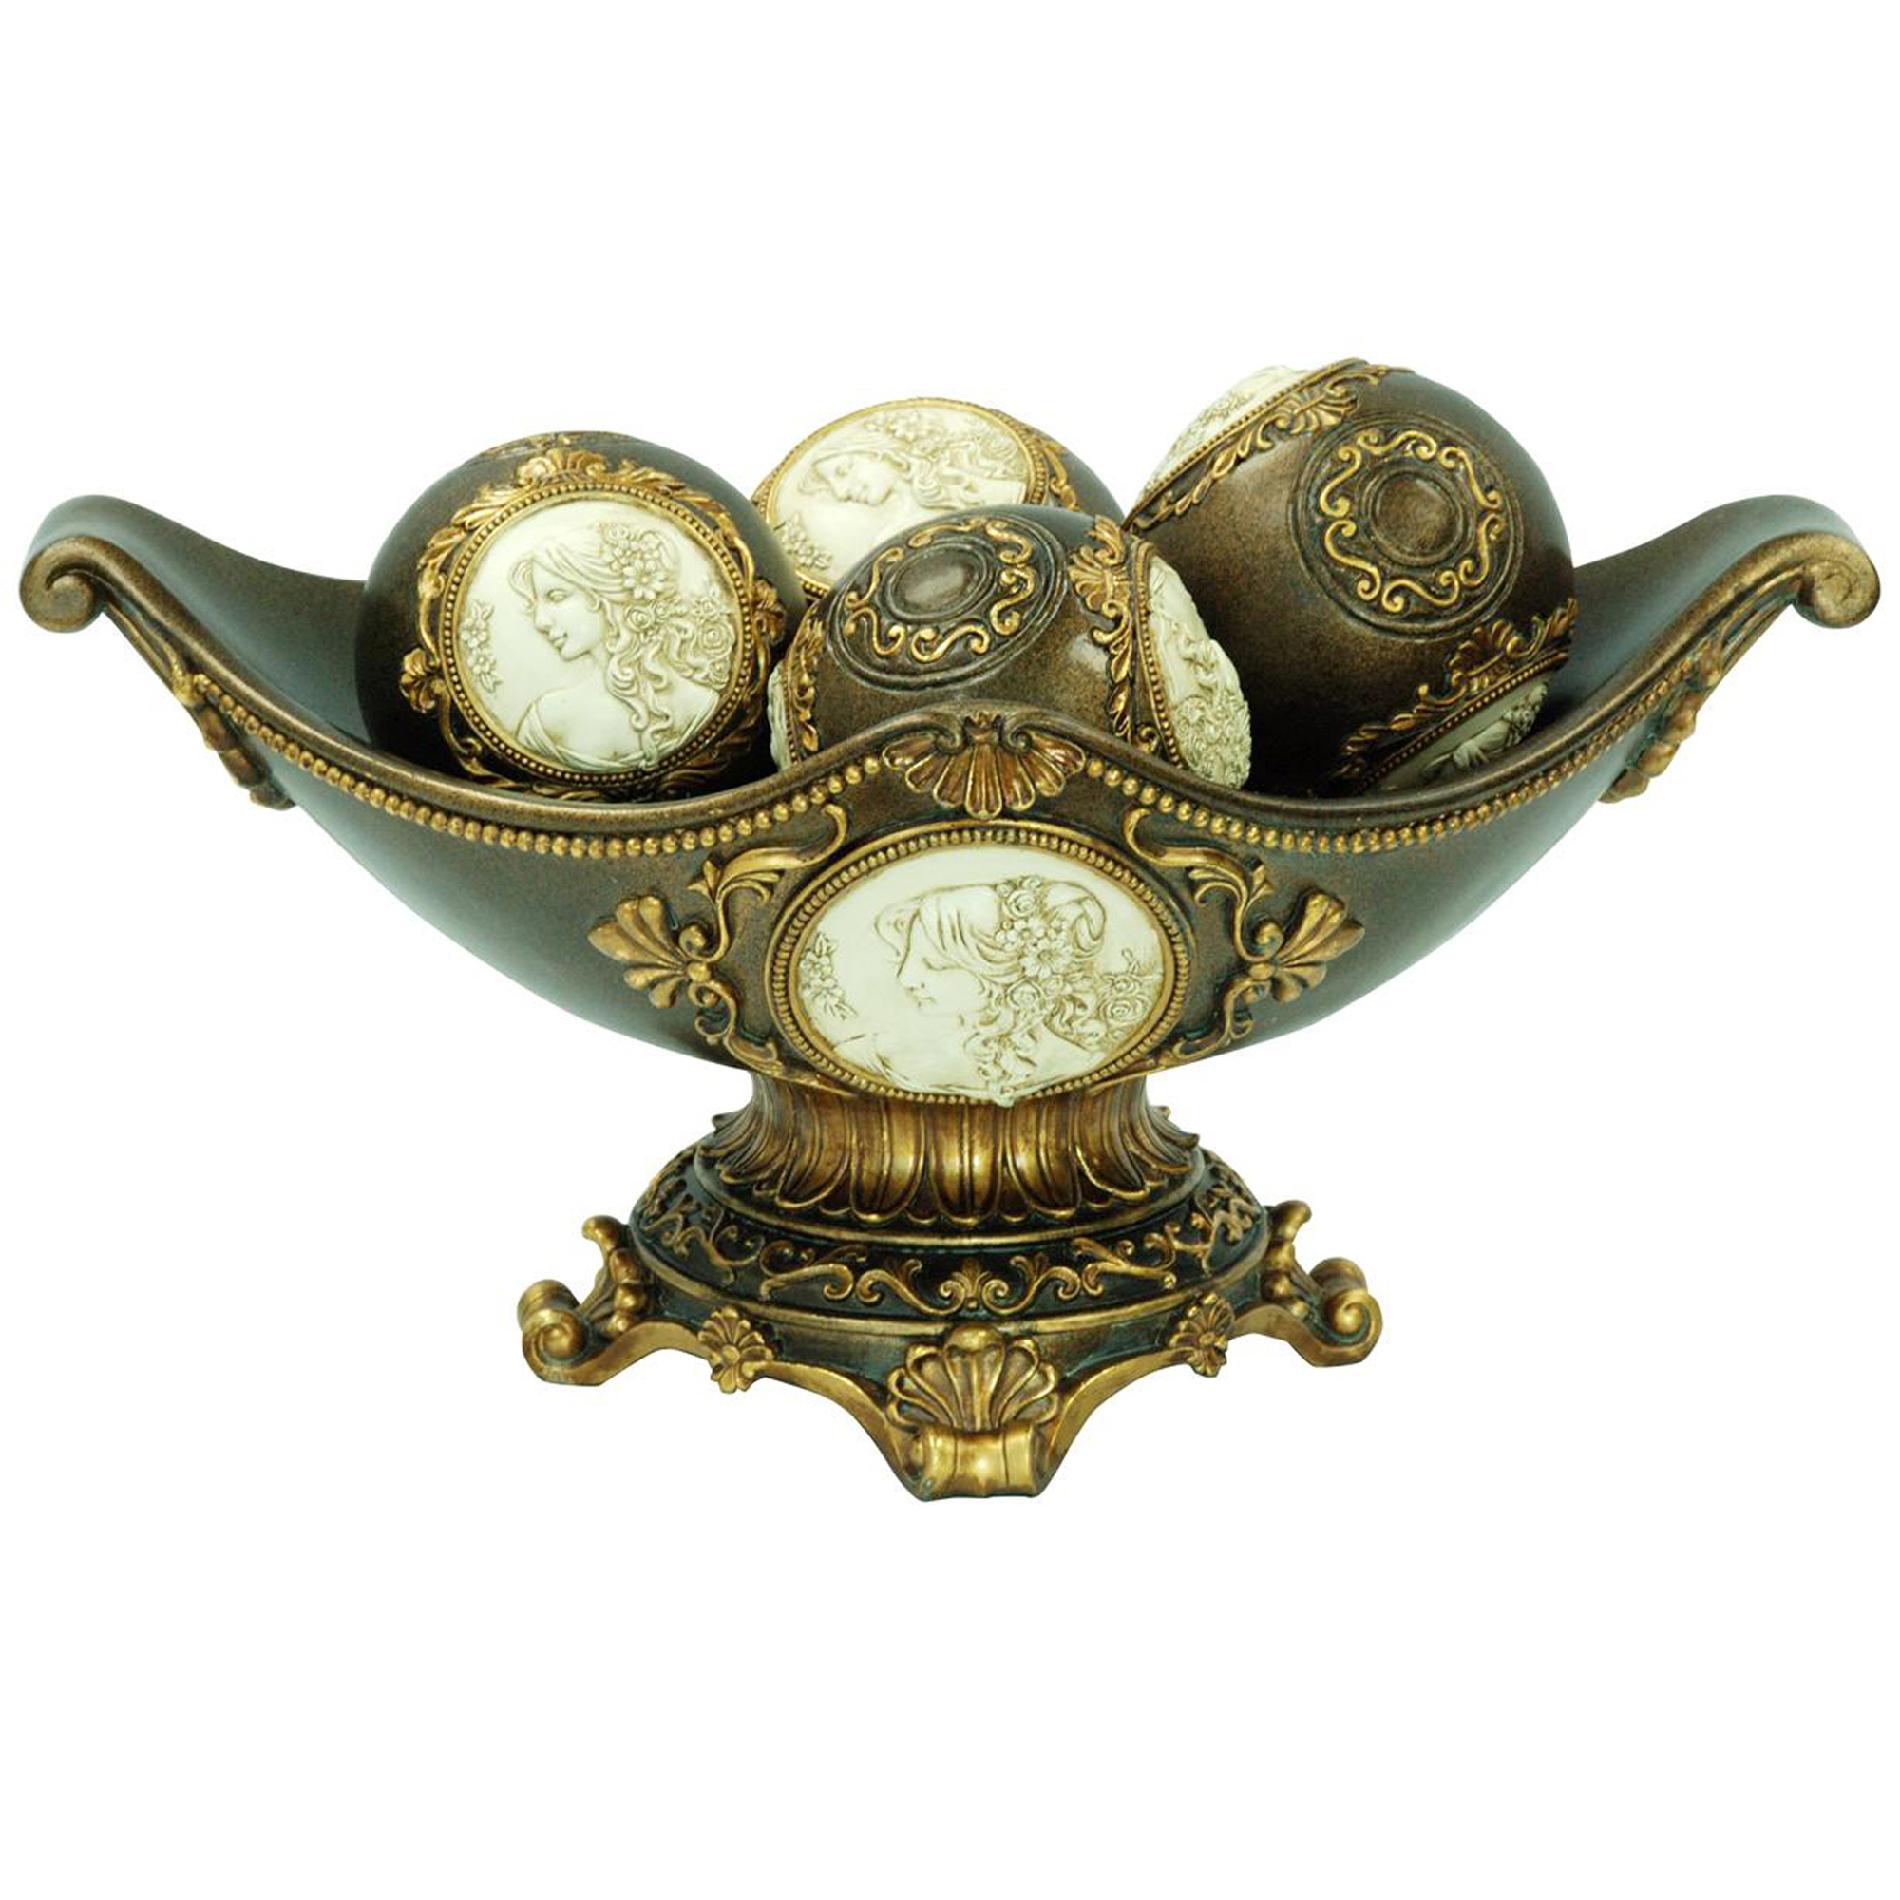 Ore International 8"H Handcrafted Bronze Decorative Bowl with Decorative Spheres